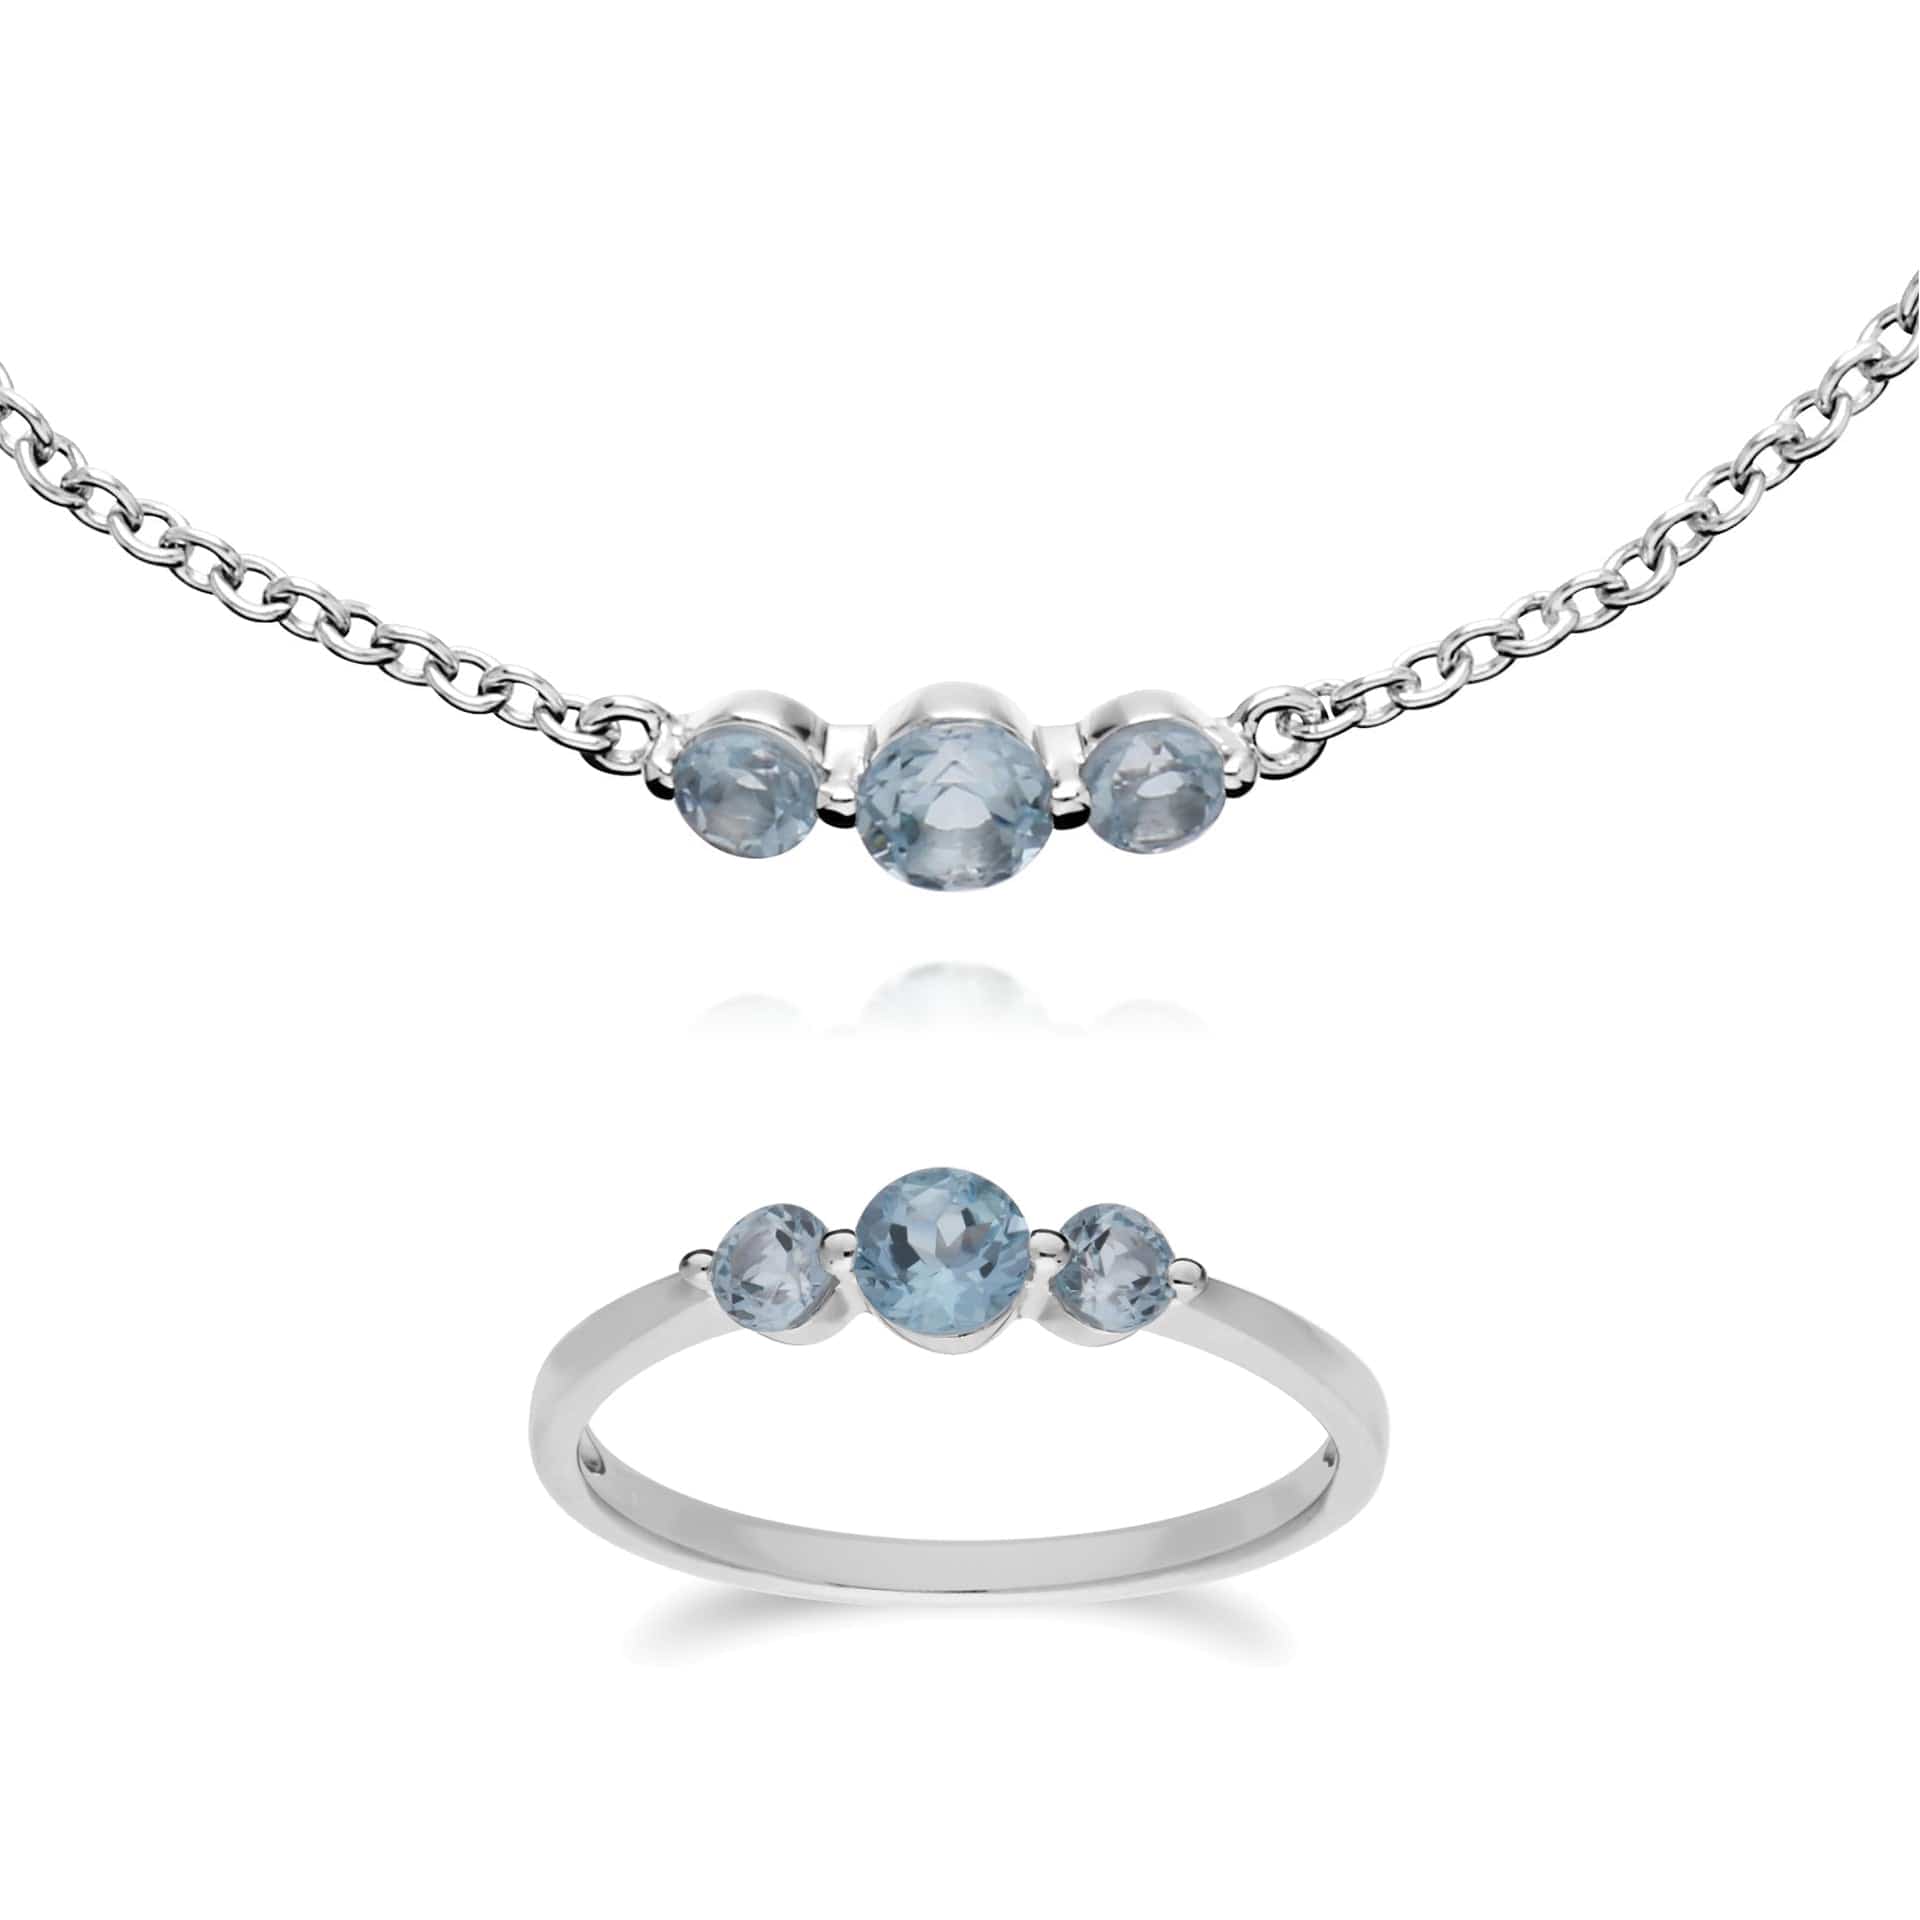 270L011101925-270R056001925 Classic Round Blue Topaz Three Stone Bracelet & Trilogy Ring Set in 925 Sterling Silver 1